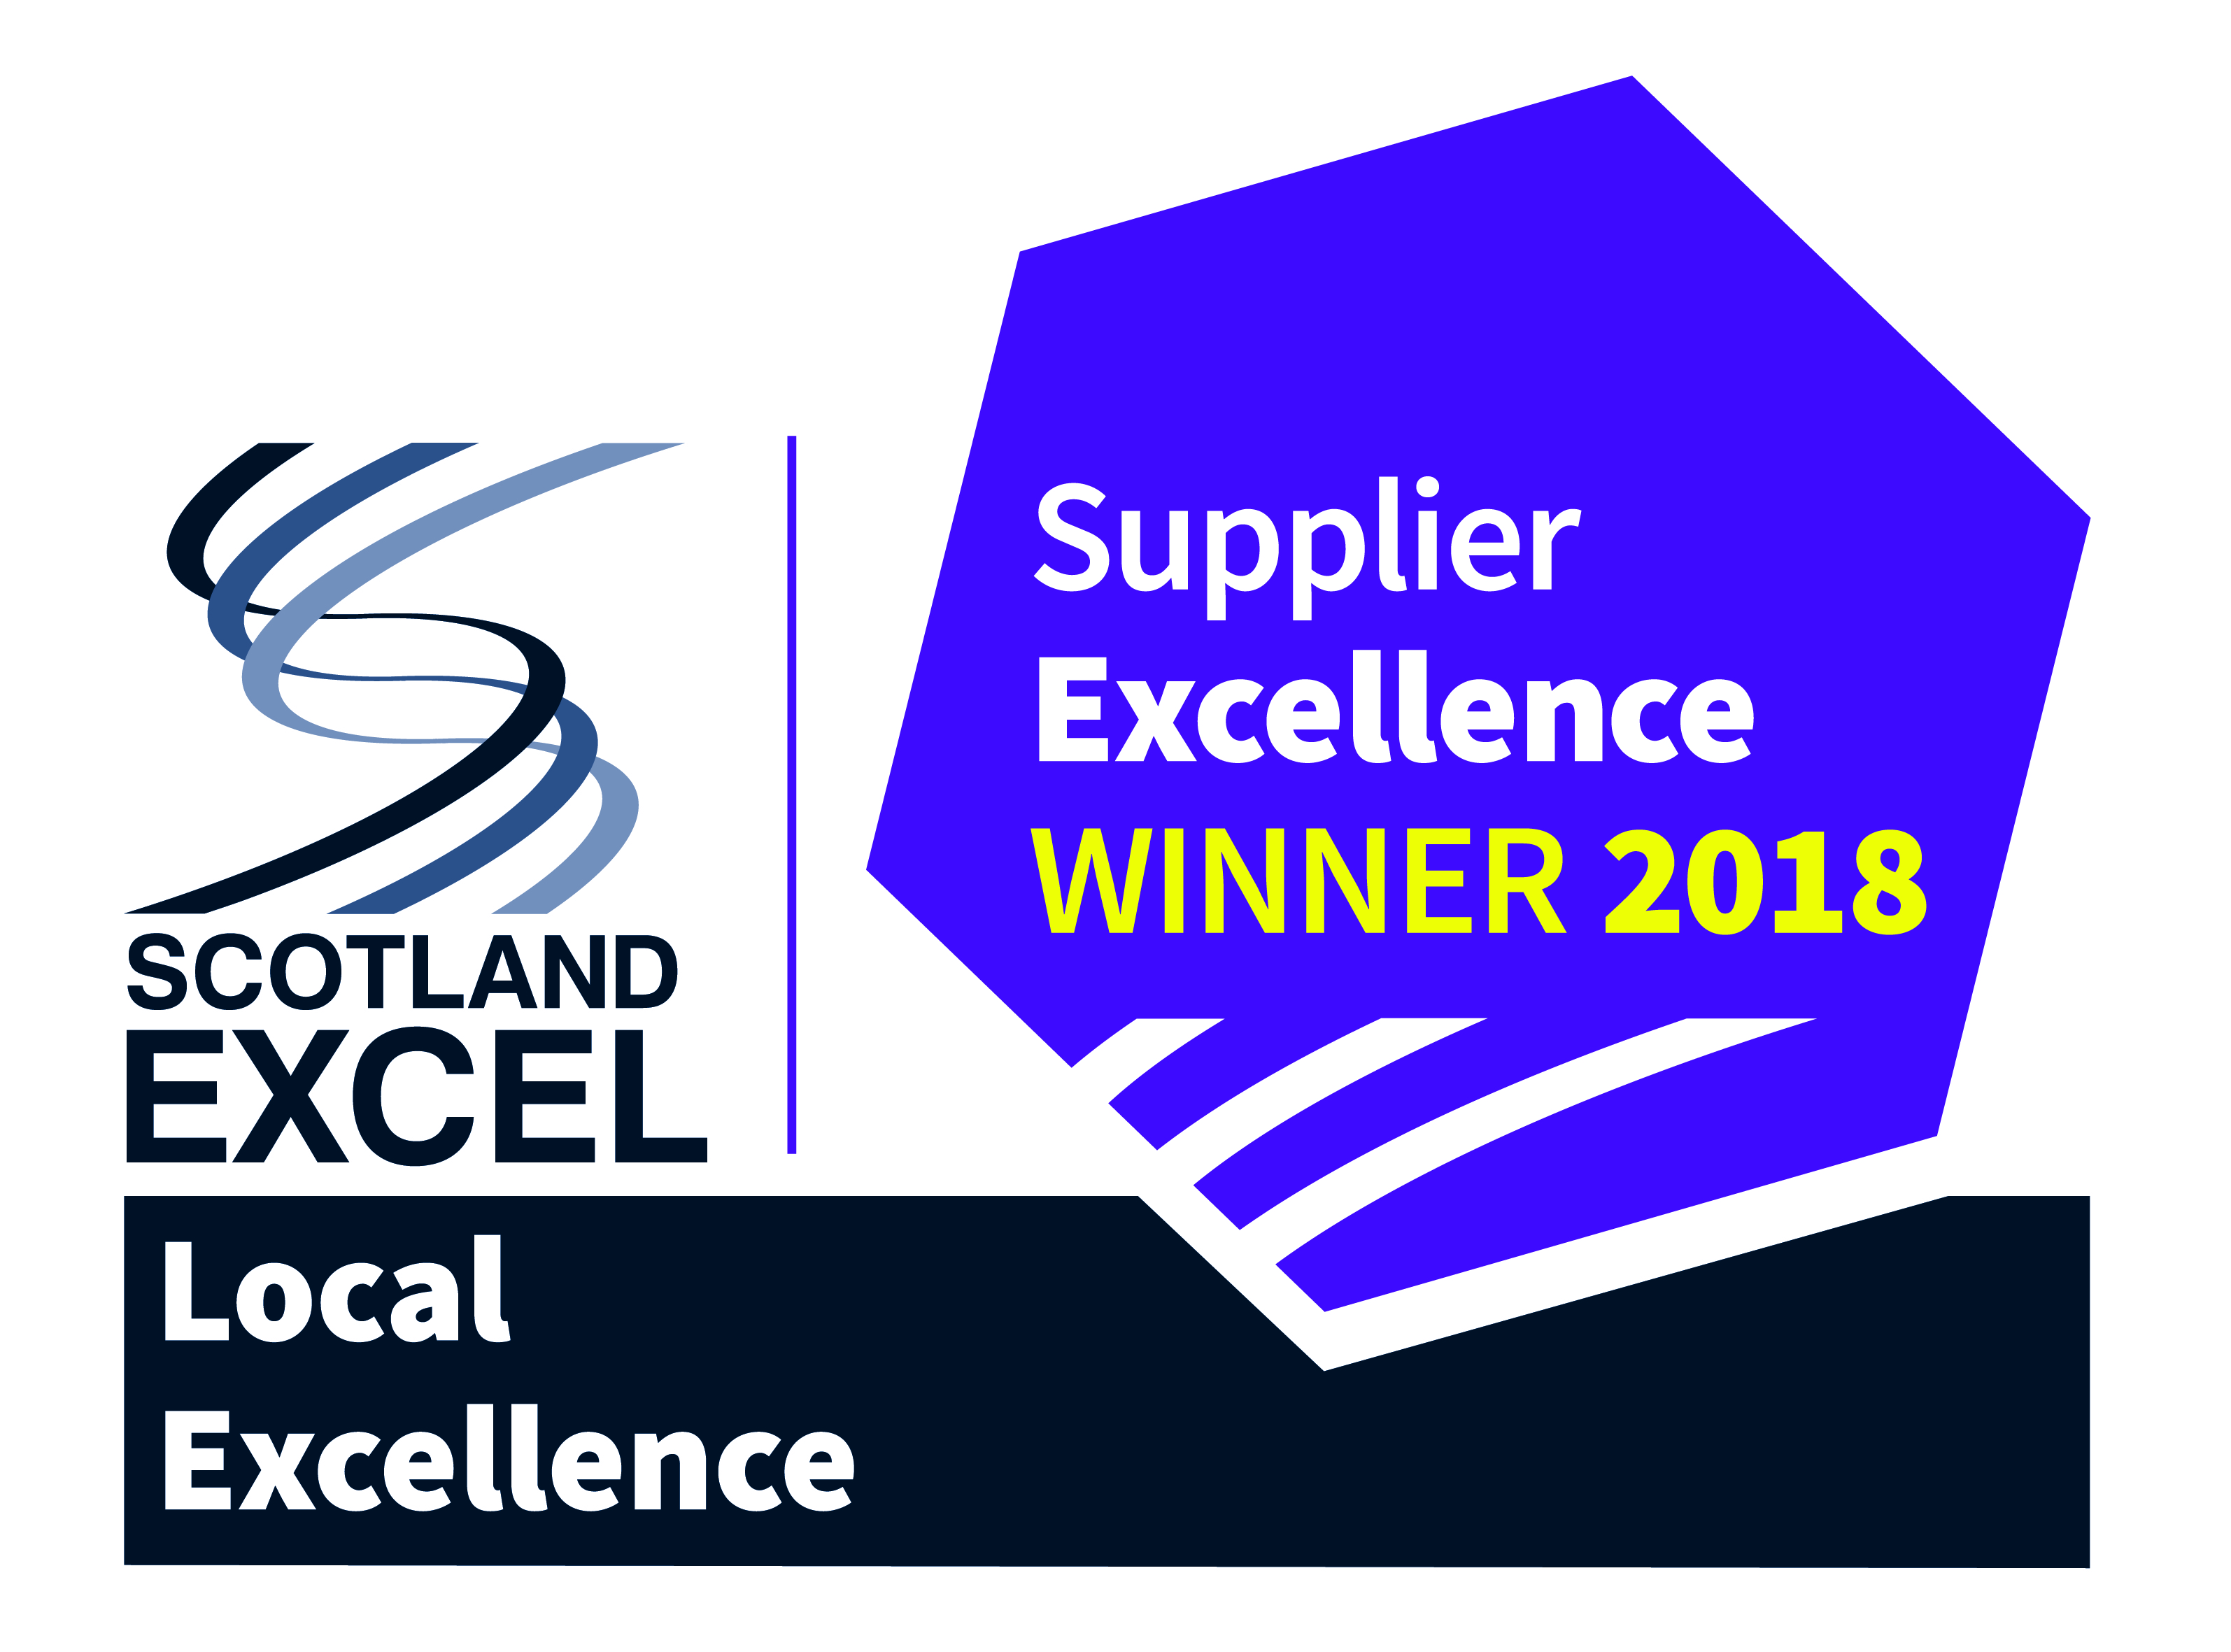 Digital telecare specialist honoured at Scotland Excel’s Supplier Excellence Awards